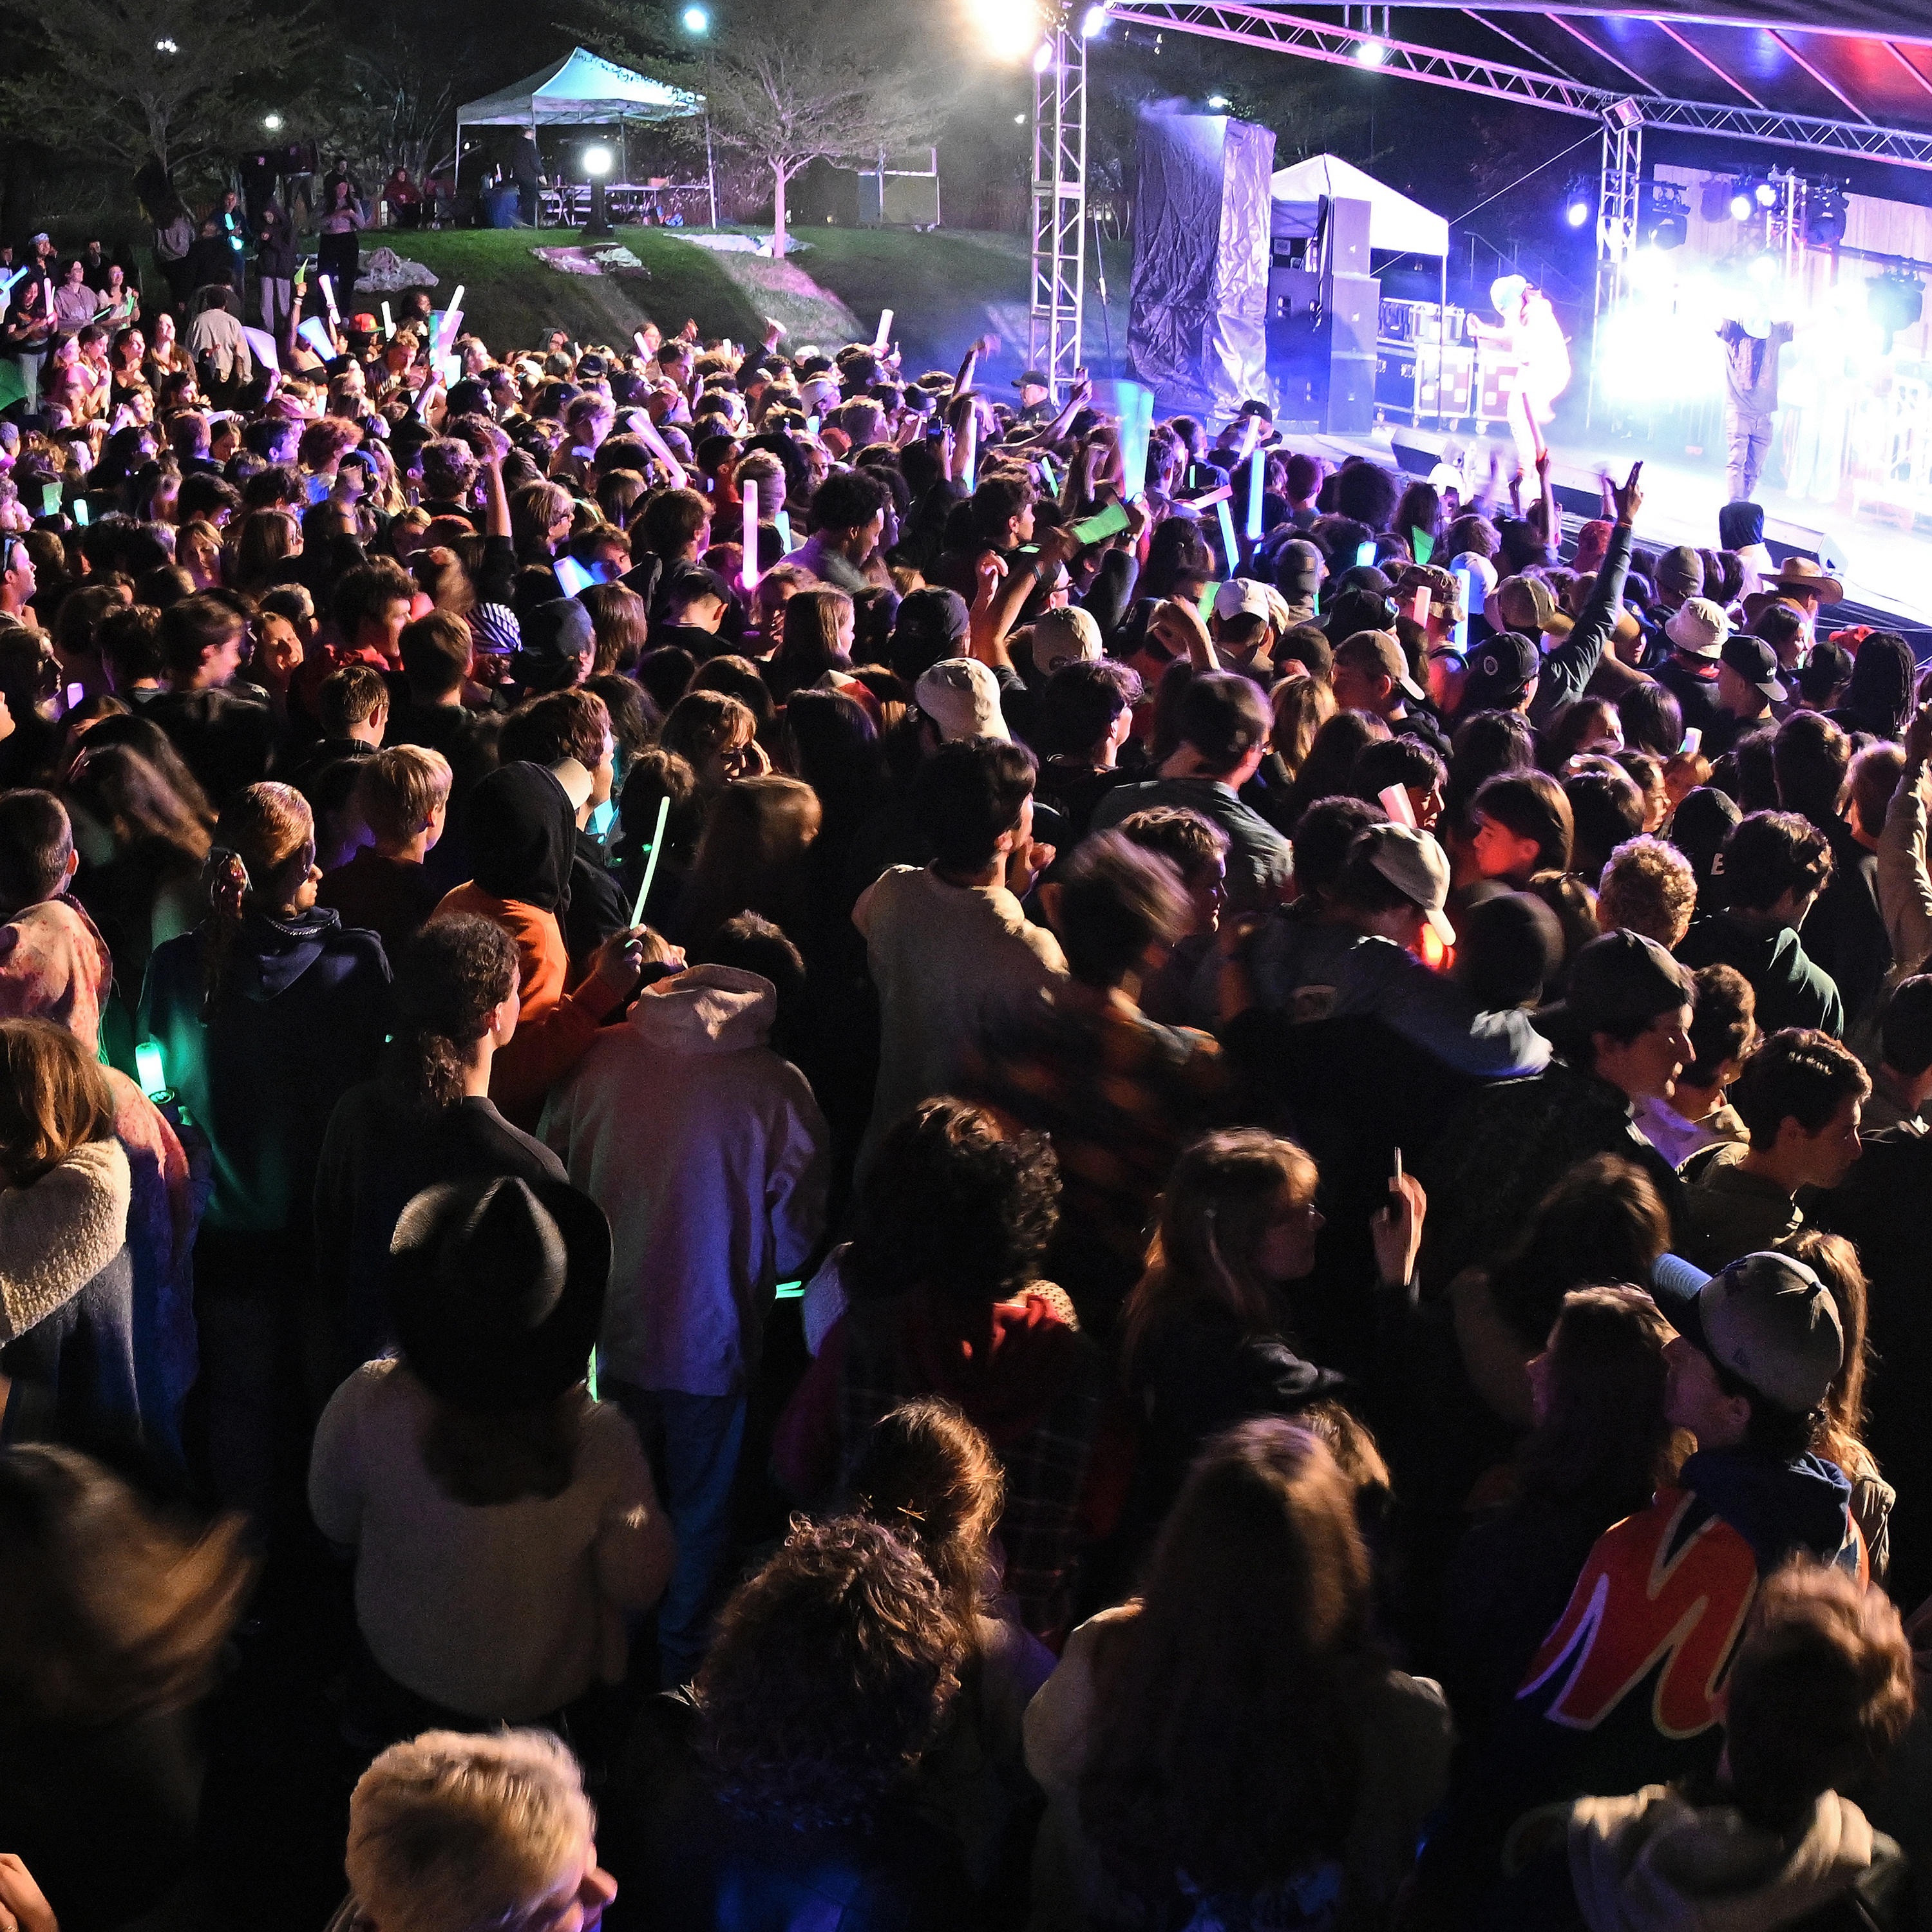 A crowd of concertgoers dance while lit by the glow from the stage